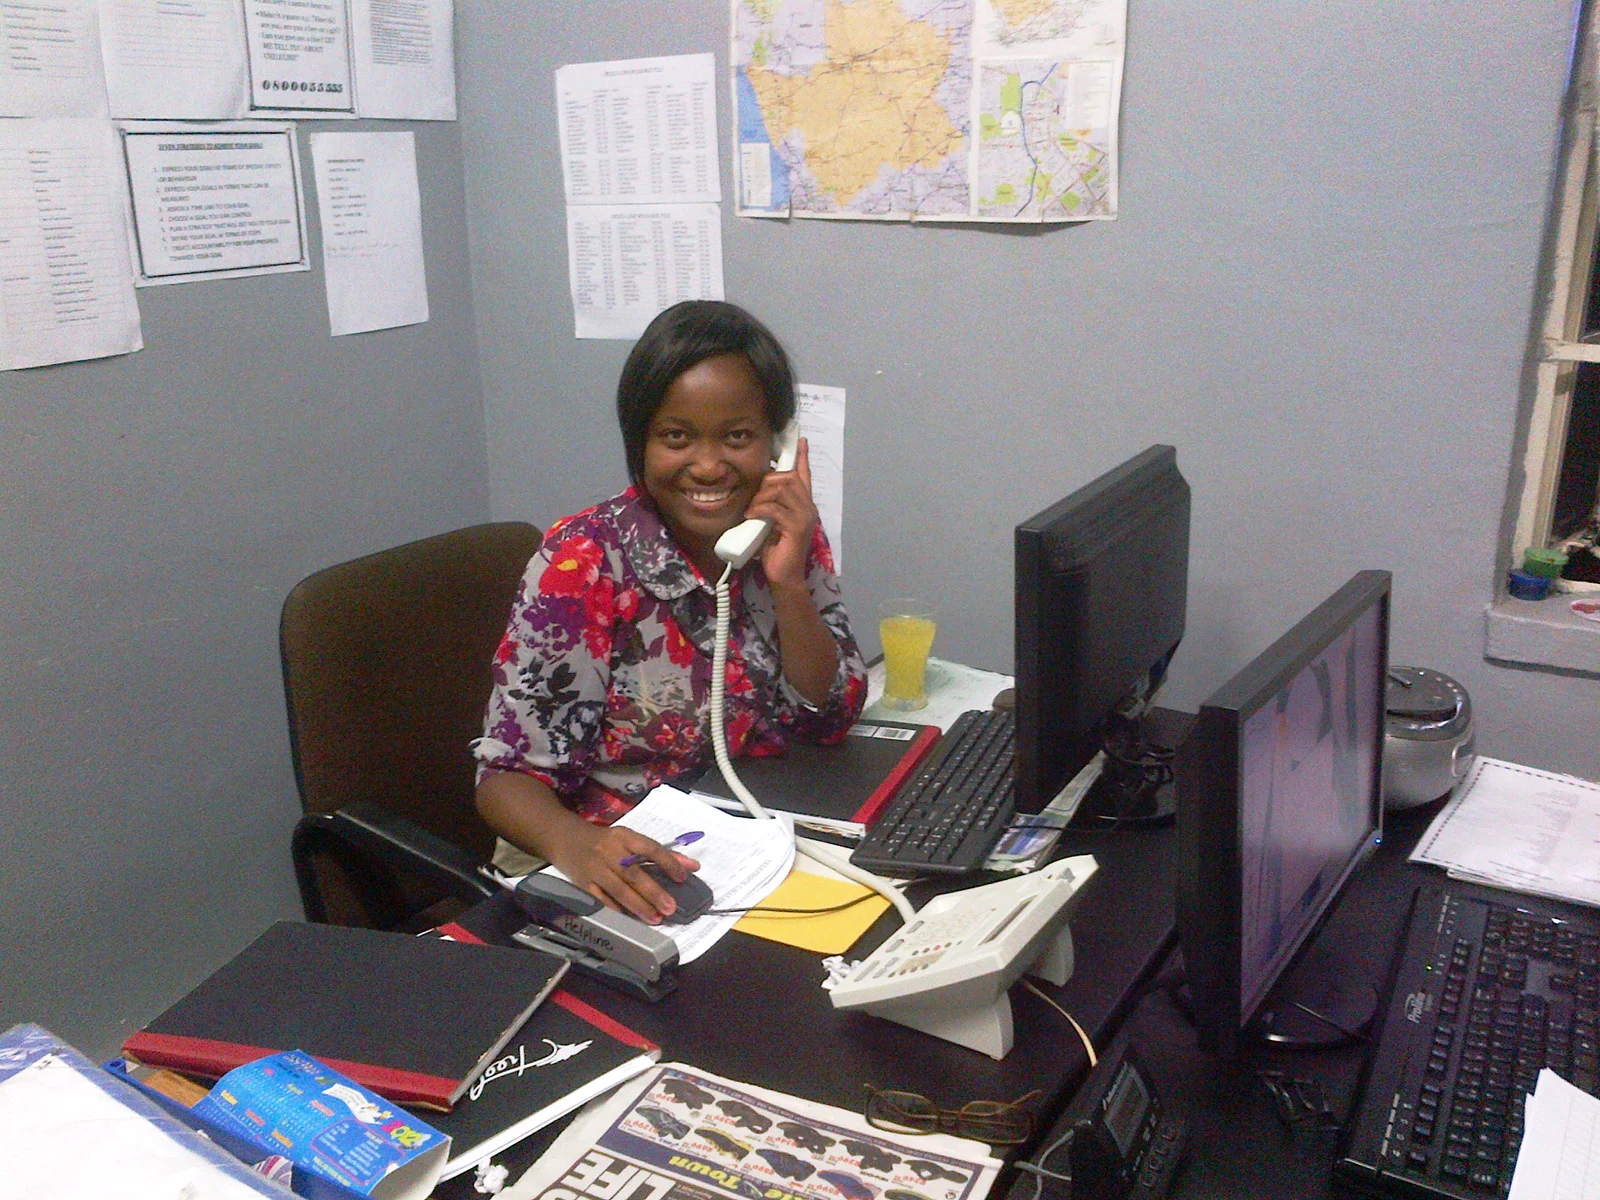 Childline South Africa counselor on phone